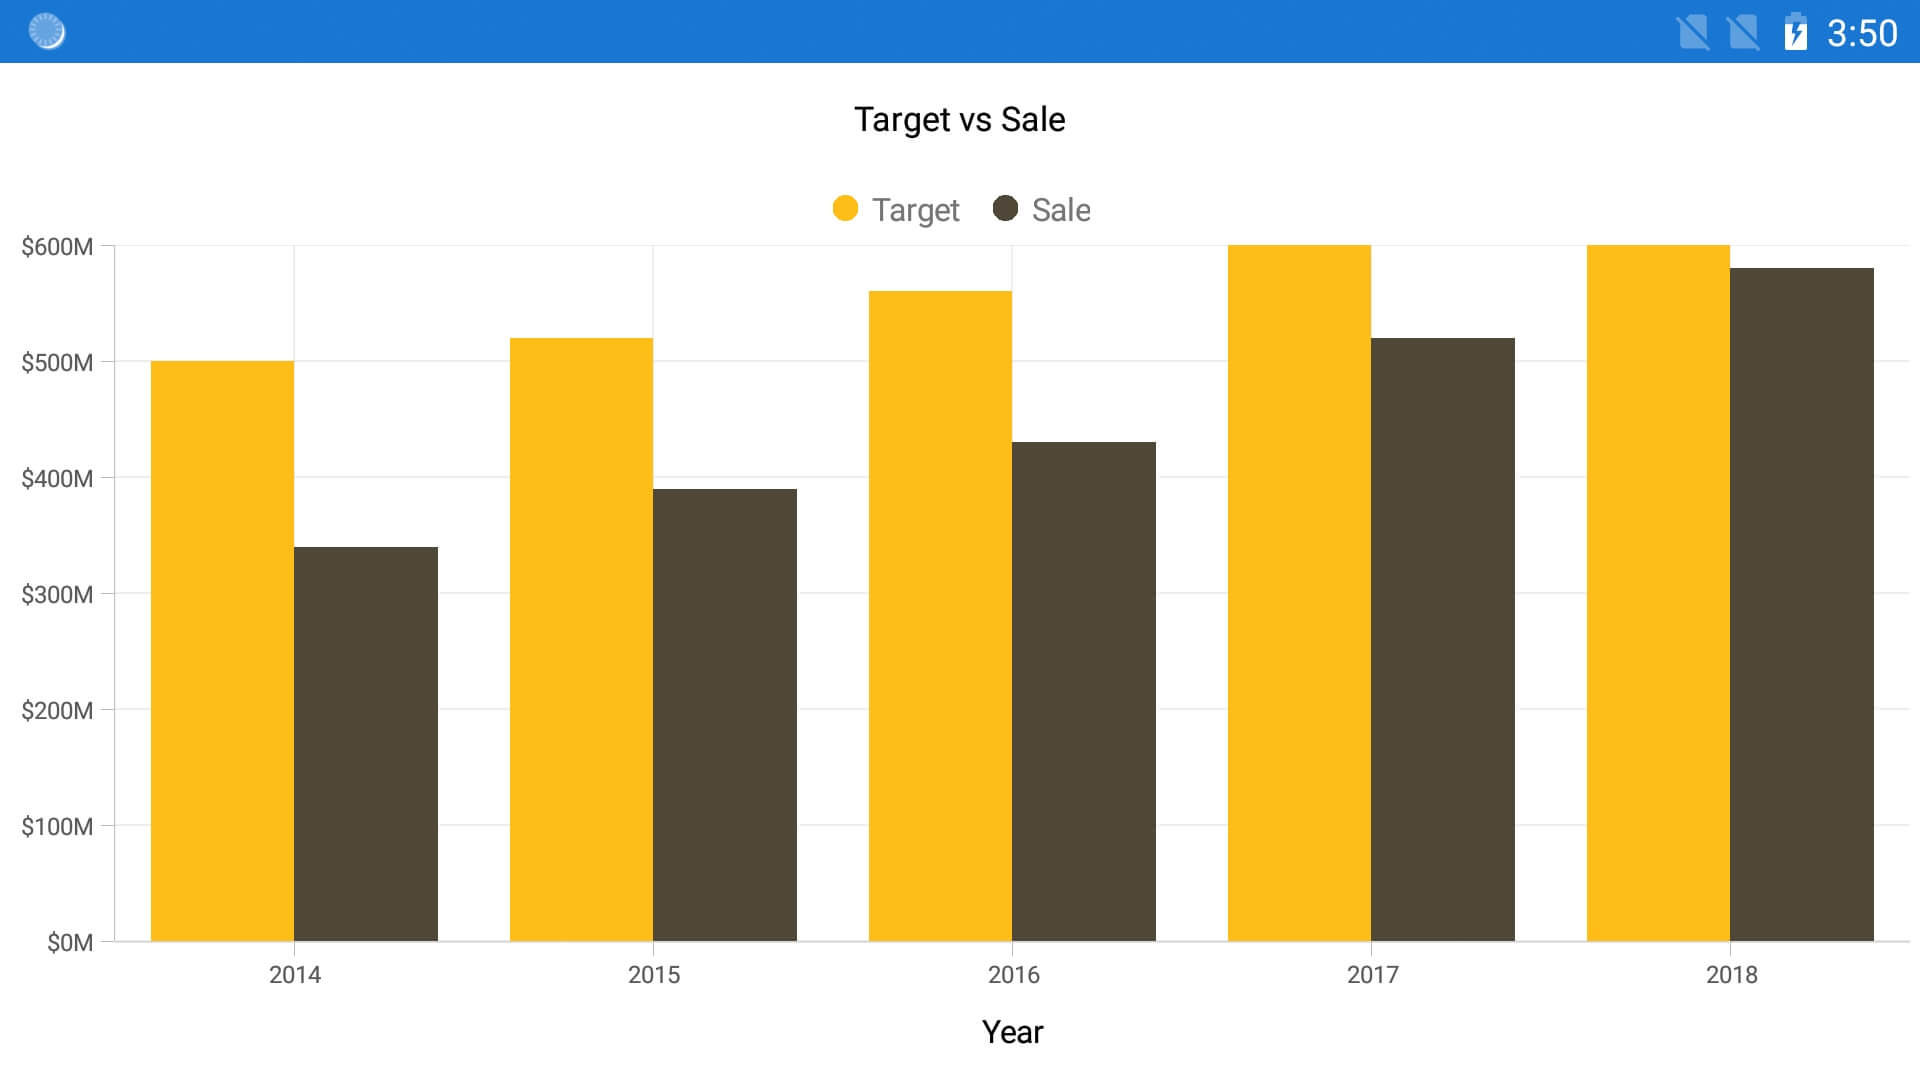 Target vs. Sale bar chart in a Xamarin.Forms app